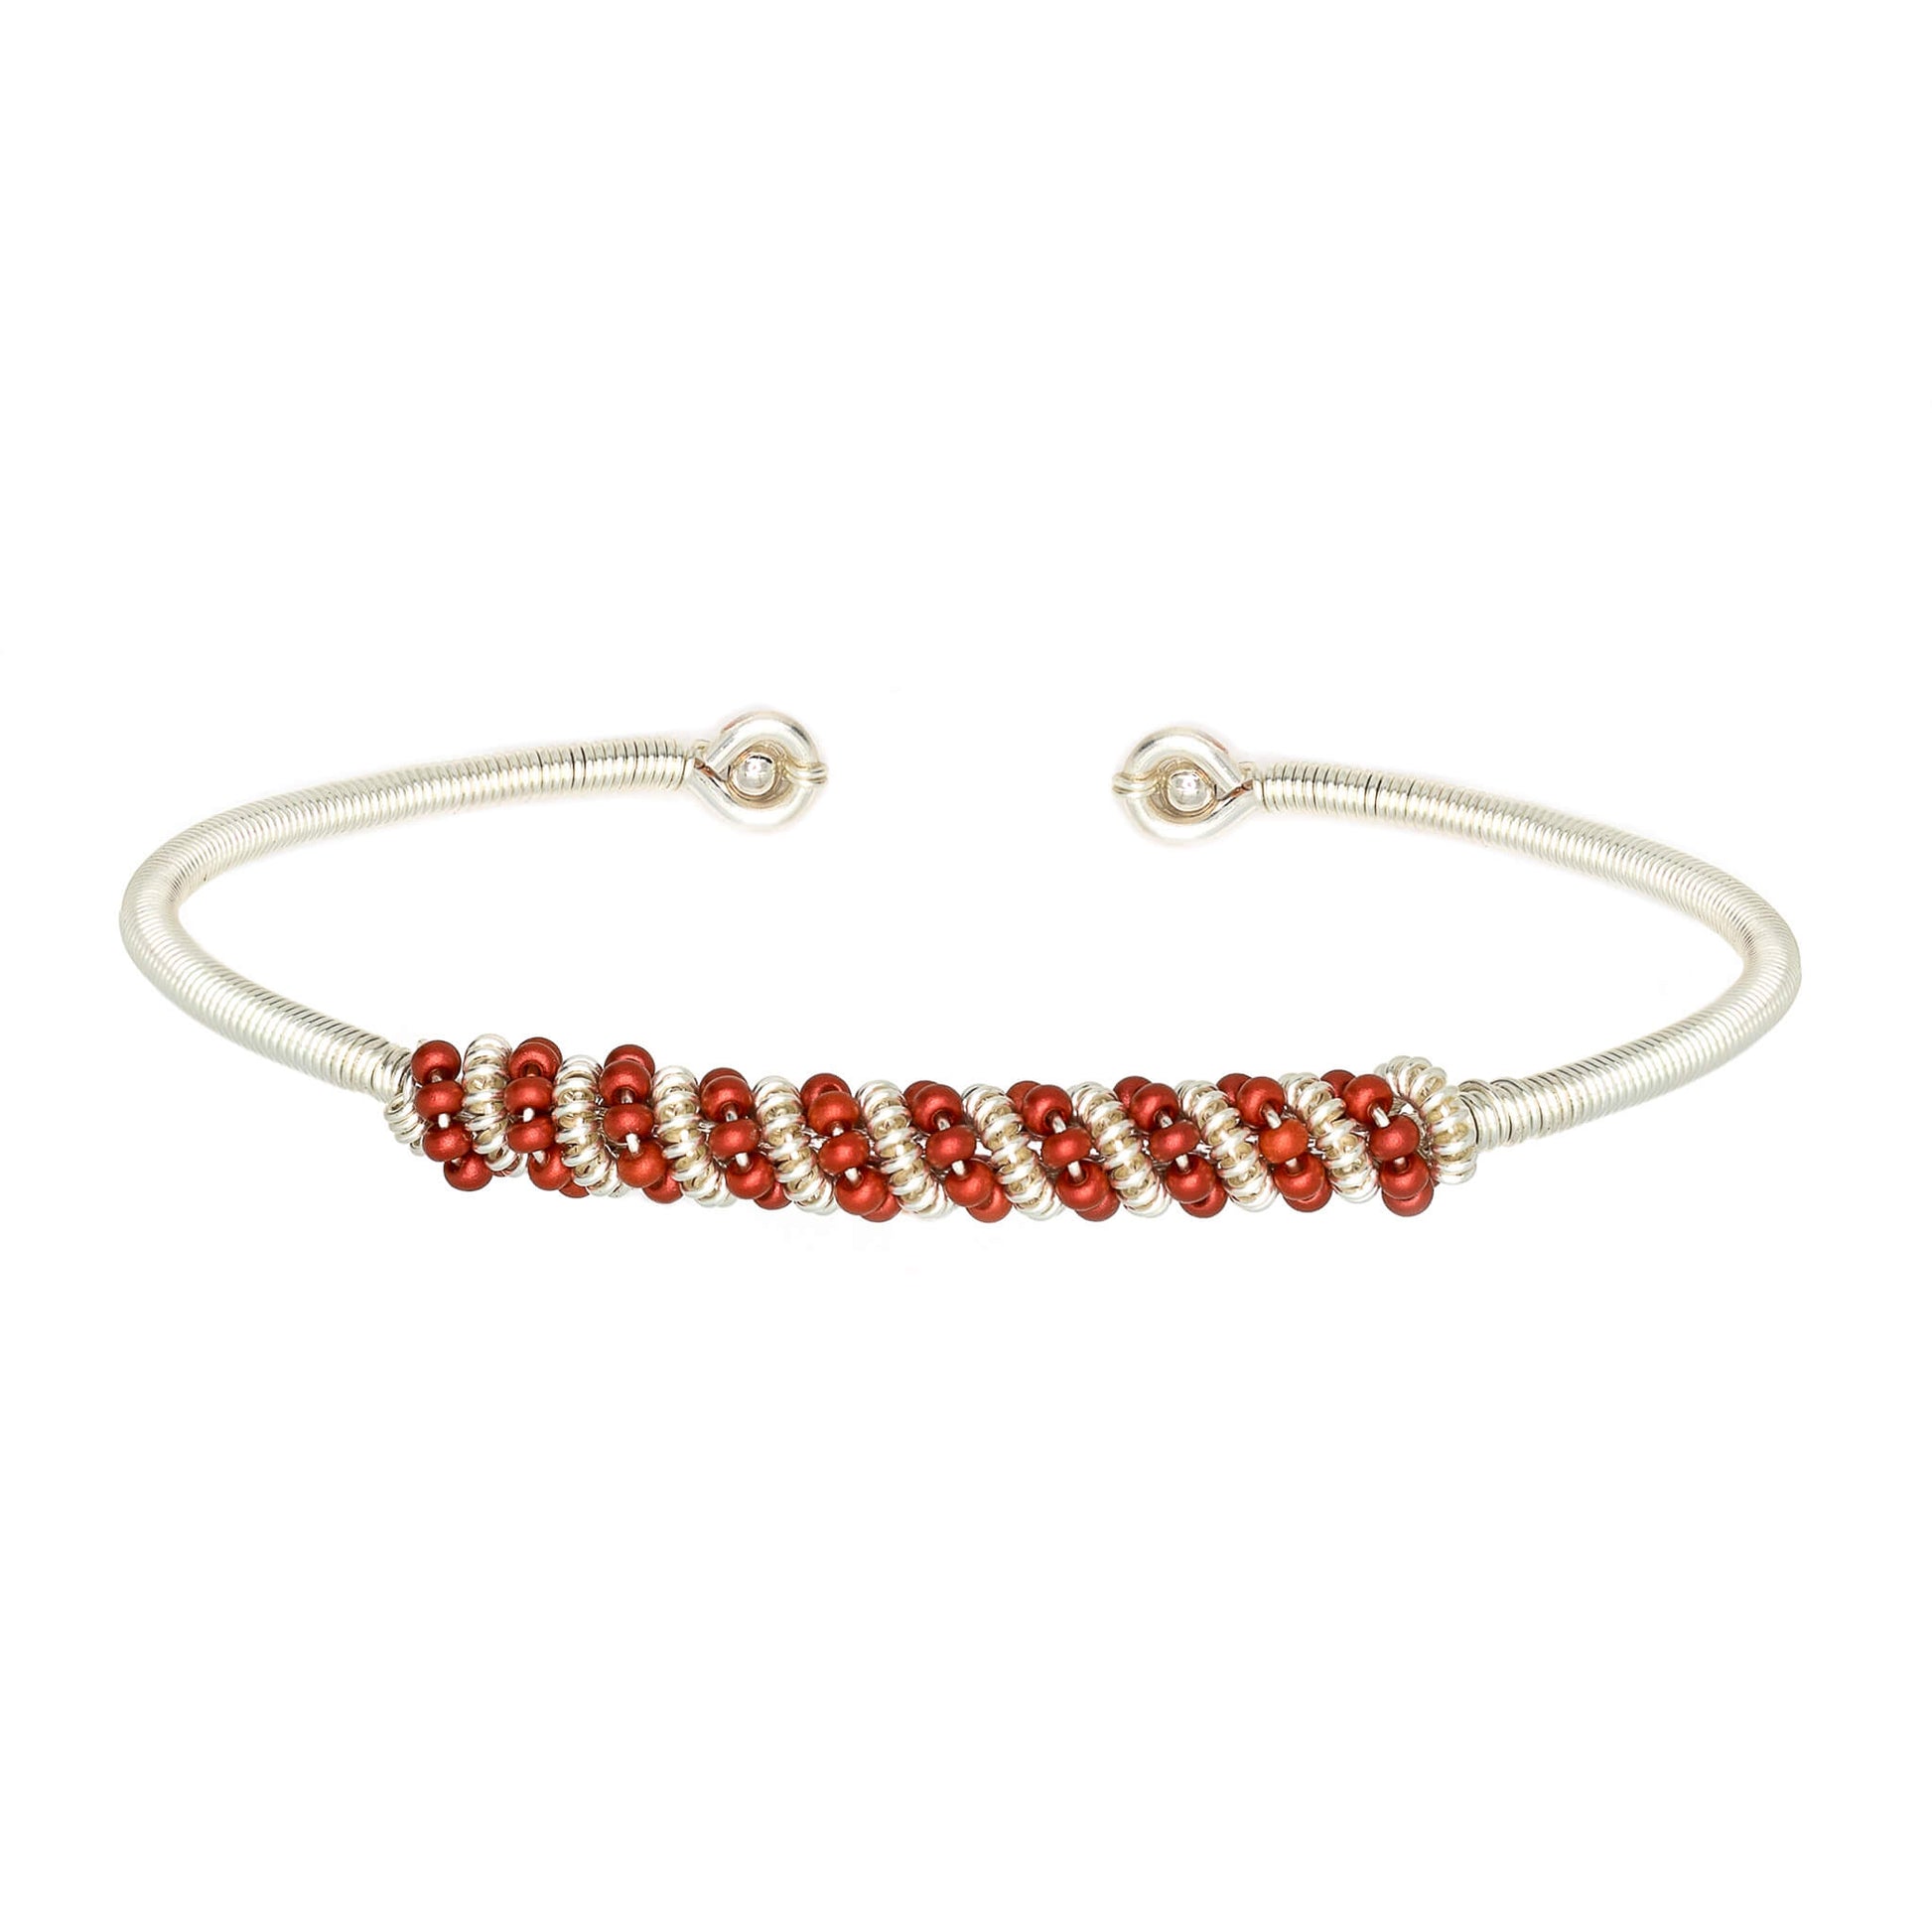 Siegen Bracelet is one size fits all. Silver and red bracelet. Handmade with Non-tarnish silver wire and Czech seed beads crystals. Wire-wrapped beaded bracelet.